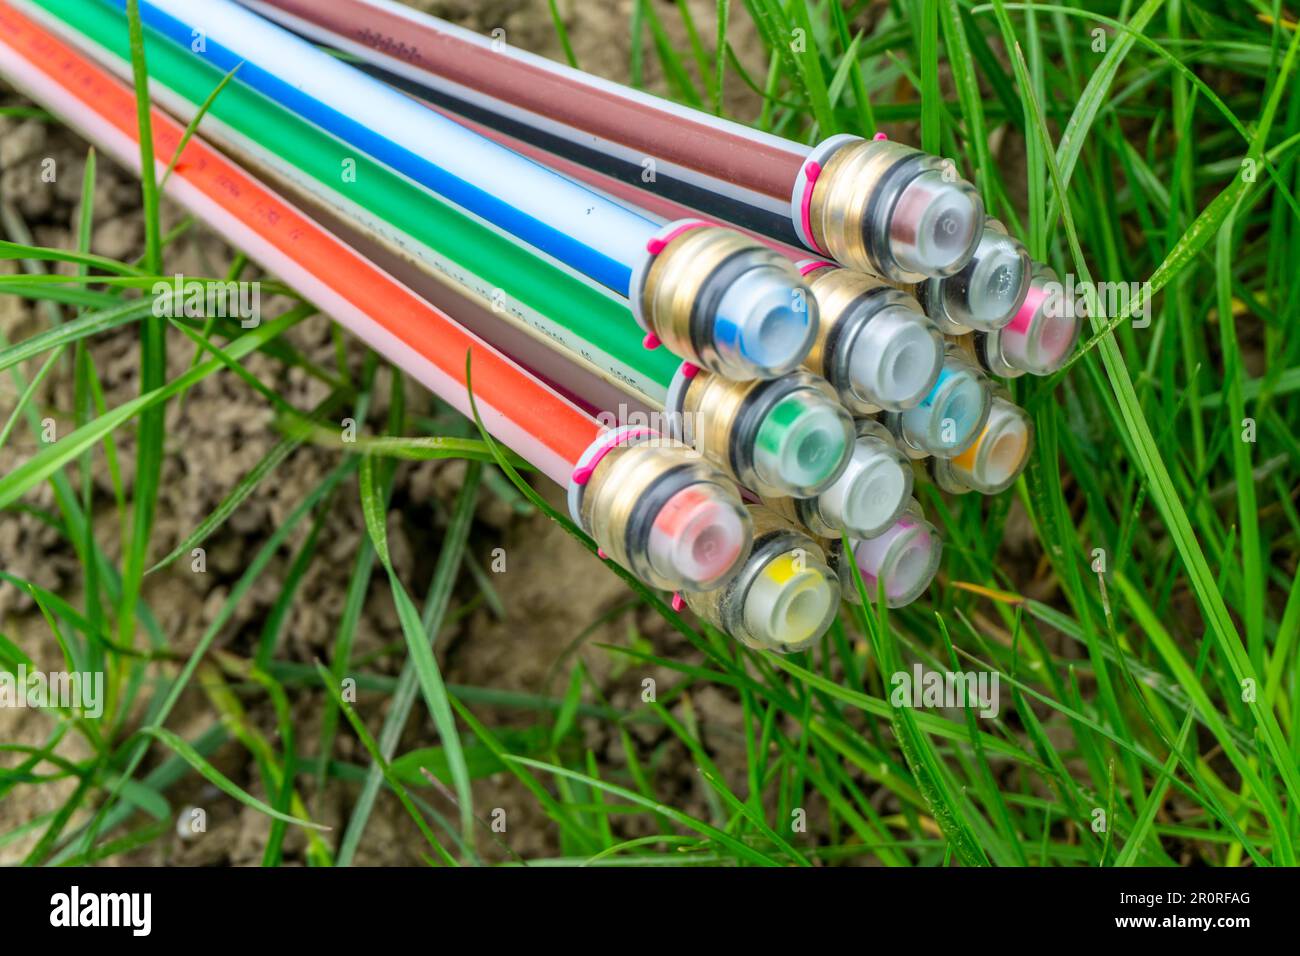 Fibre optic cable, freshly laid along a country lane, provision of fast internet in rural areas, Mülheim an der Ruhr, NRW, Germany Stock Photo